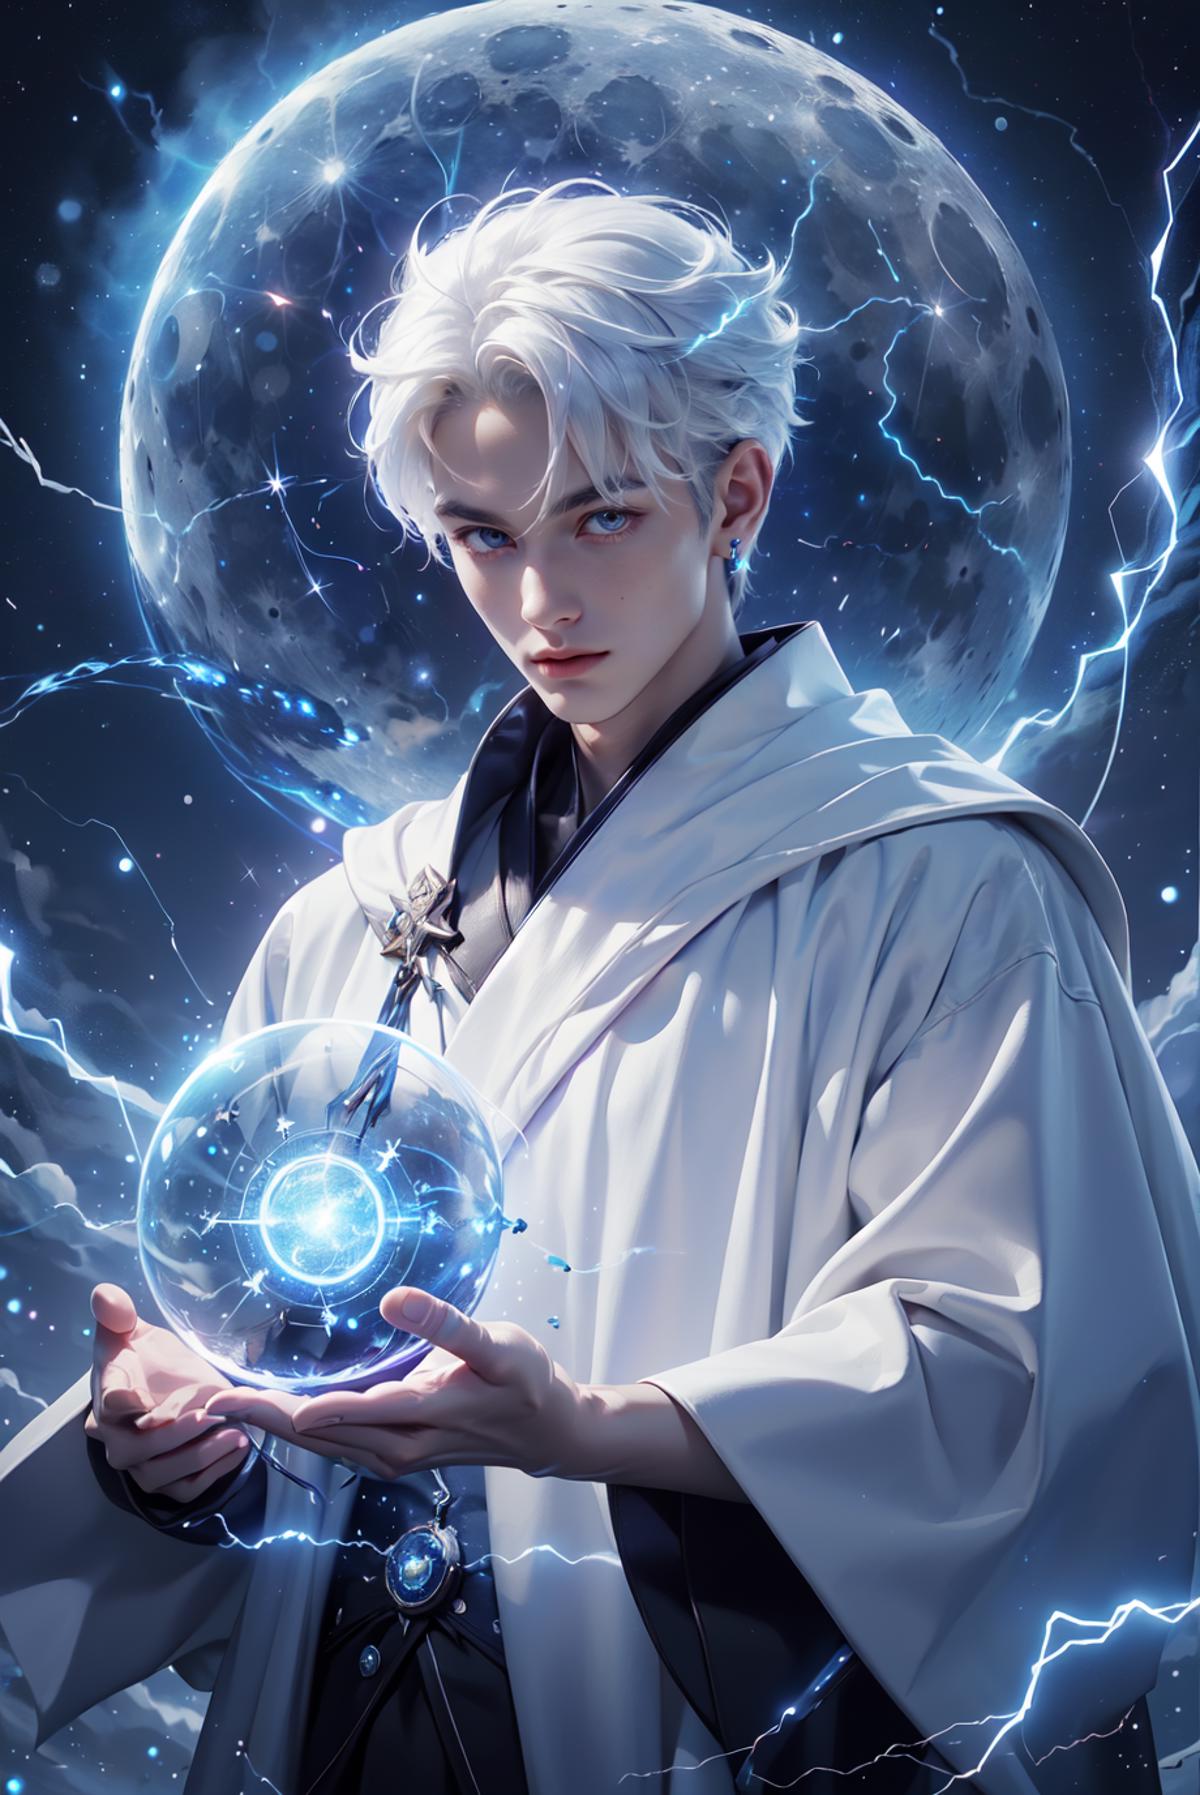 A young man with white hair holding a blue ball in front of a moon.